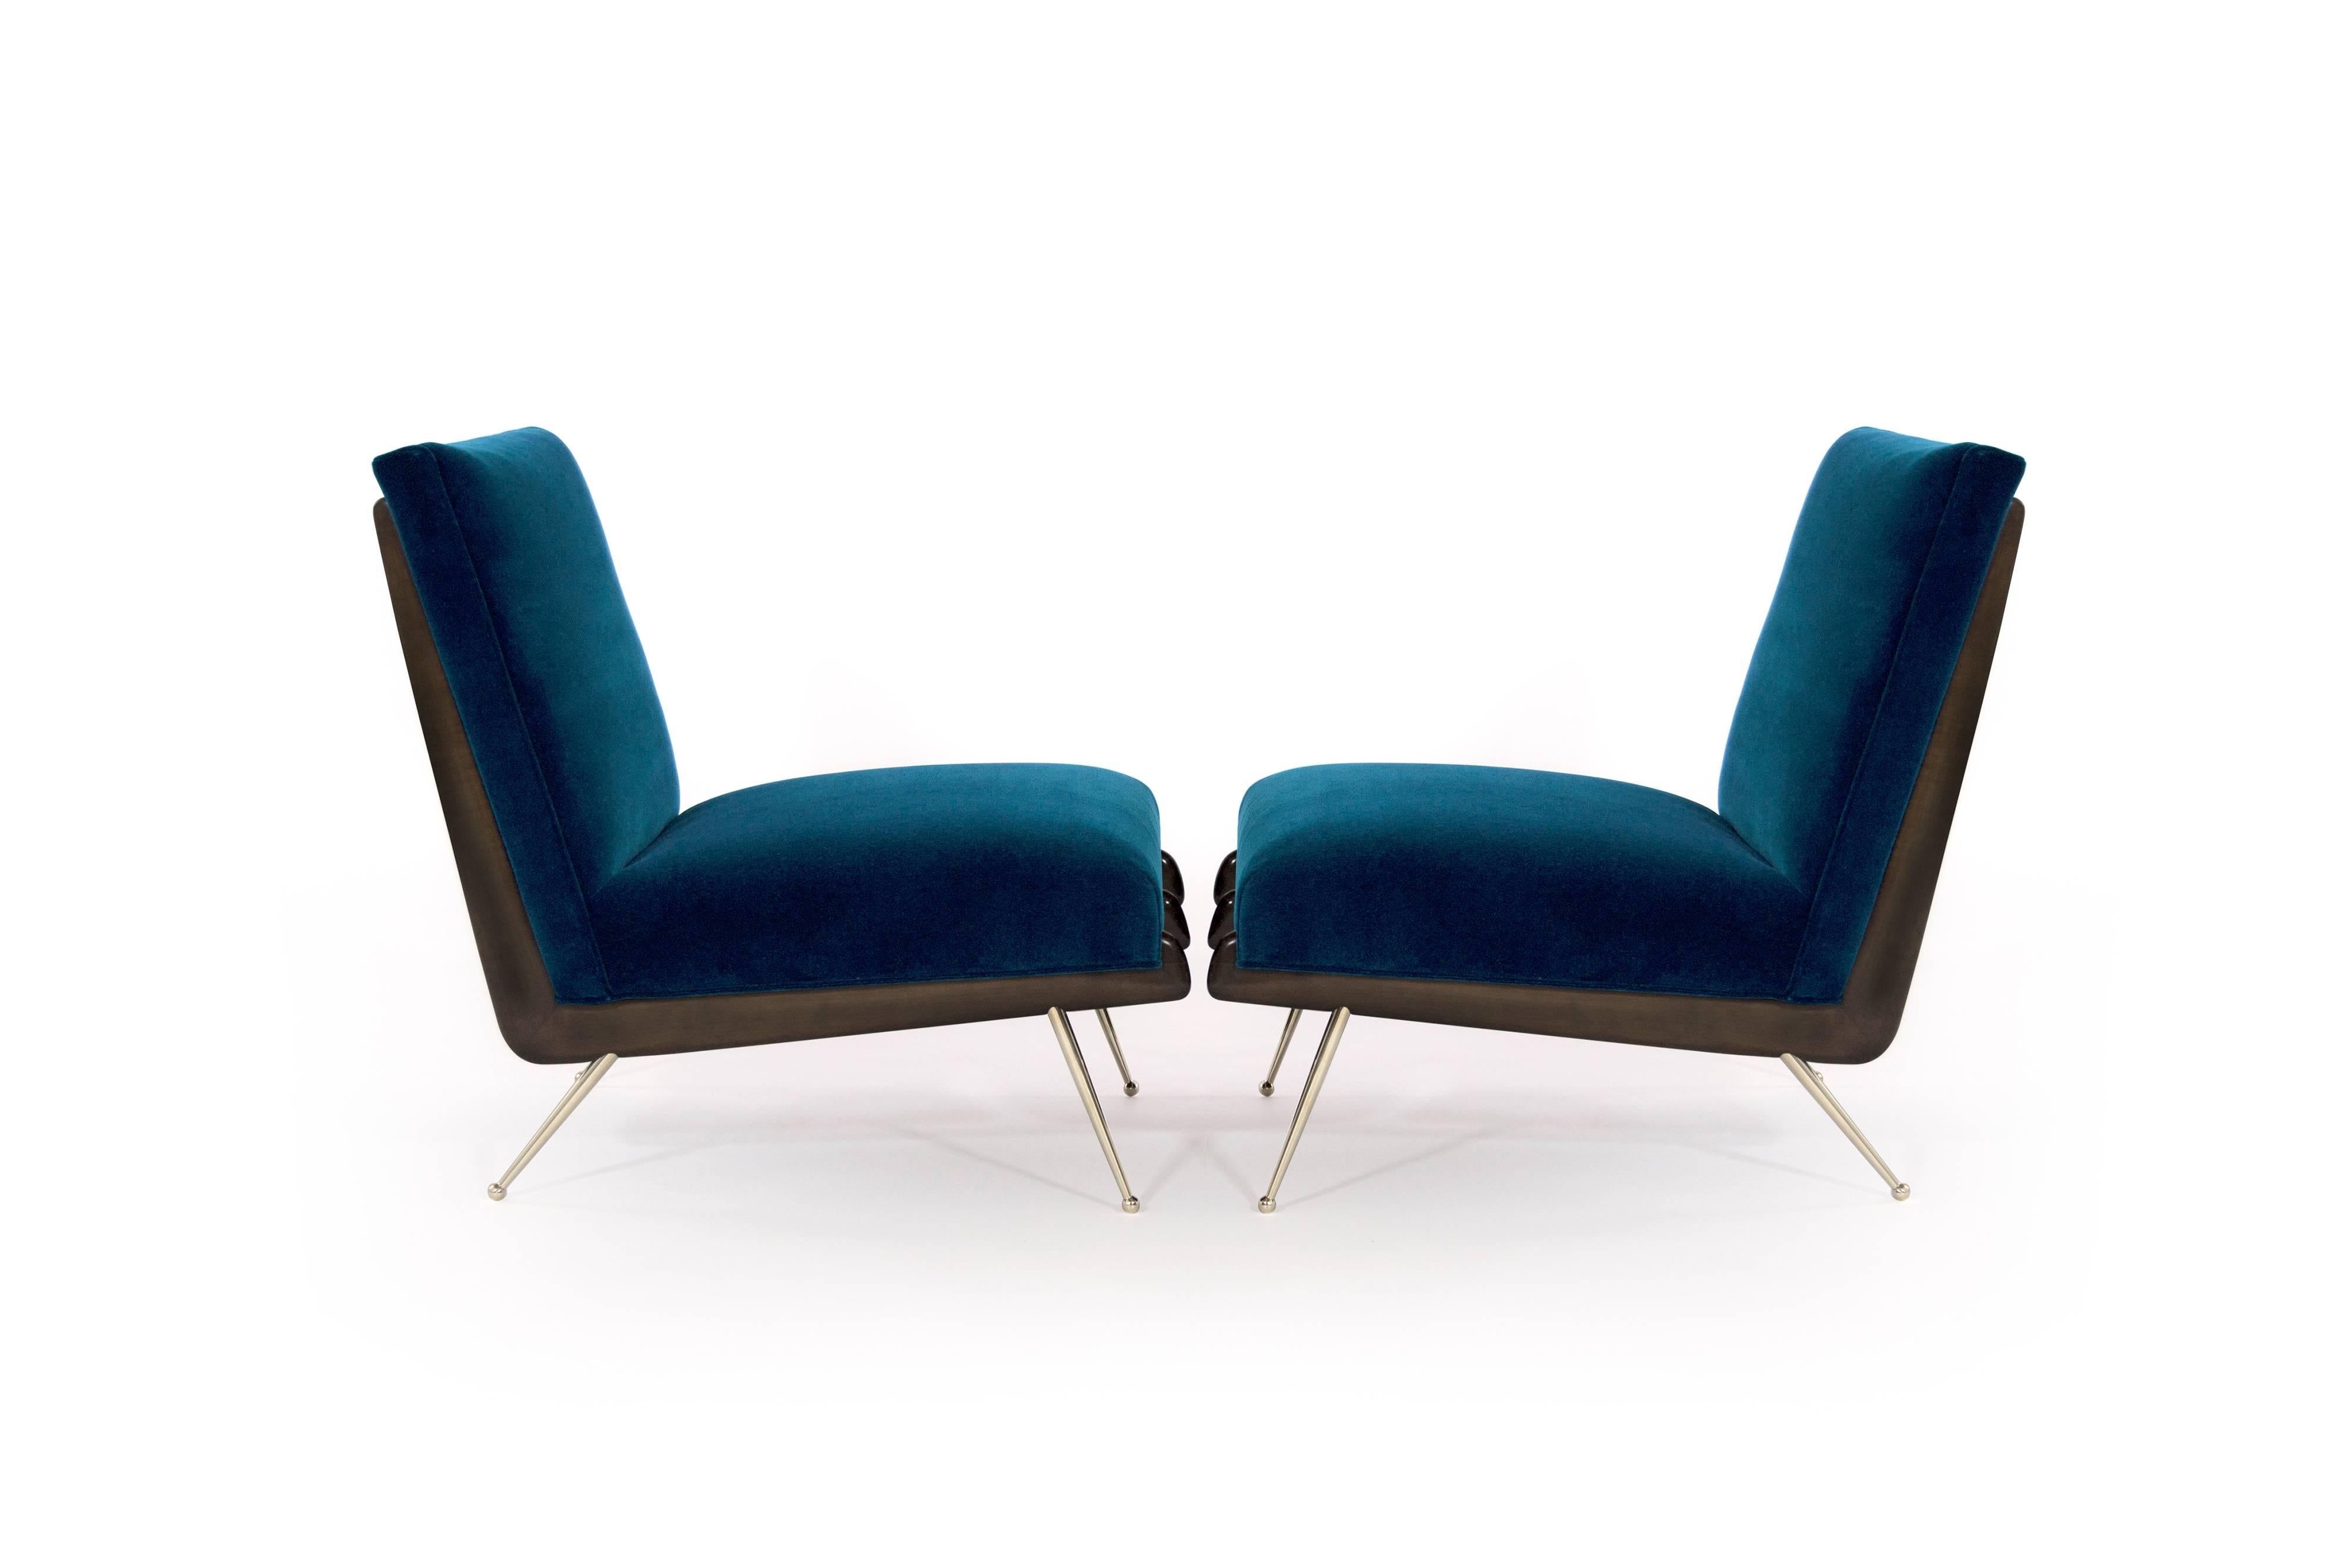 Stunning and rare pair of lounge chairs in the style of Gio Ponti, circa 1950s.

Boomerang shaped walnut frames fully restored, newly upholstered in Holly Hunt aqua cotton velvet. Thin tapered brass legs newly polished.